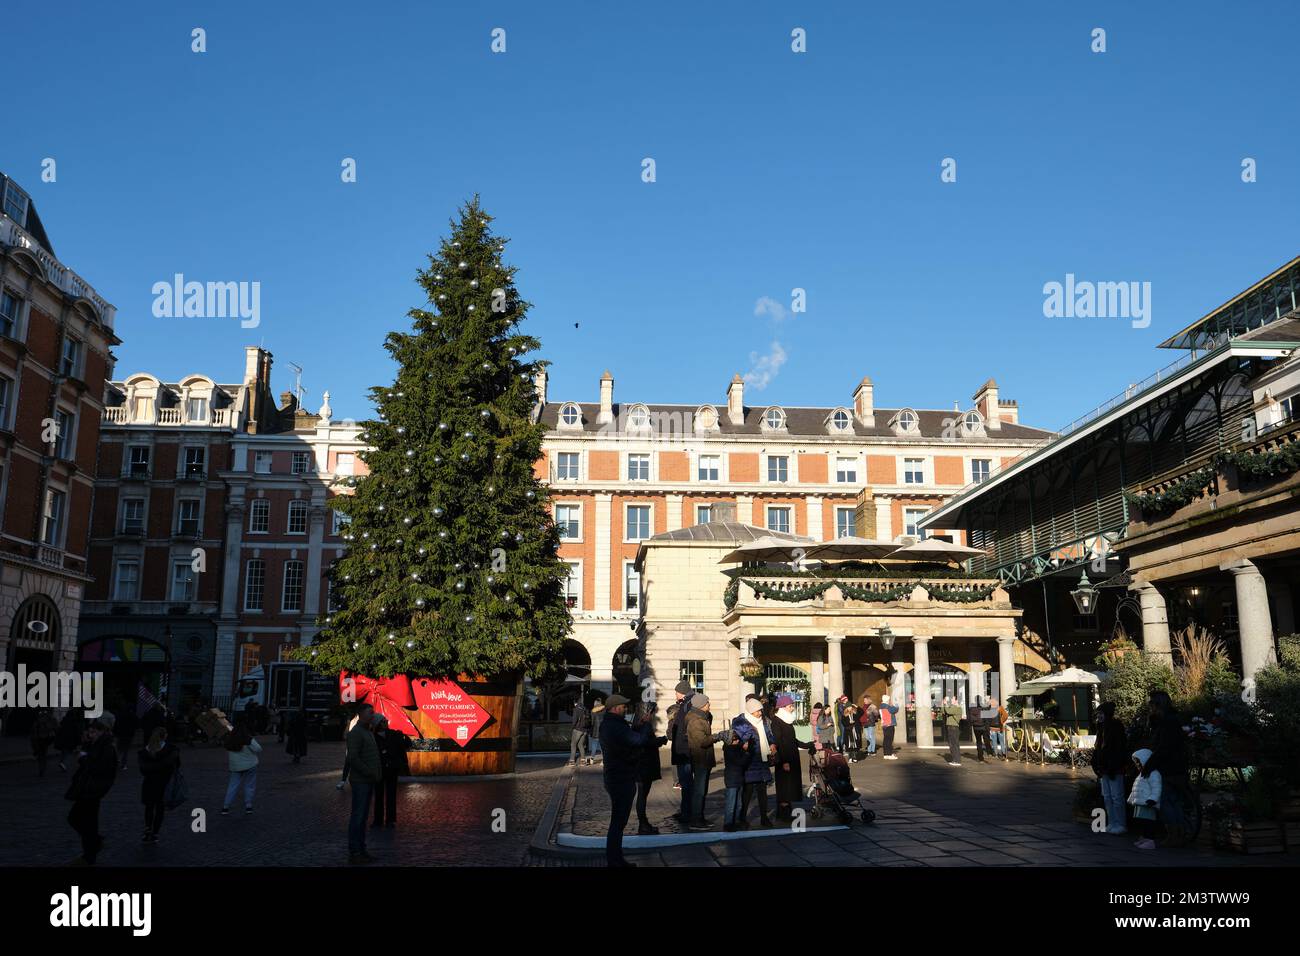 View of Convent Garden Christmas tree, London, United Kingdom. Stock Photo